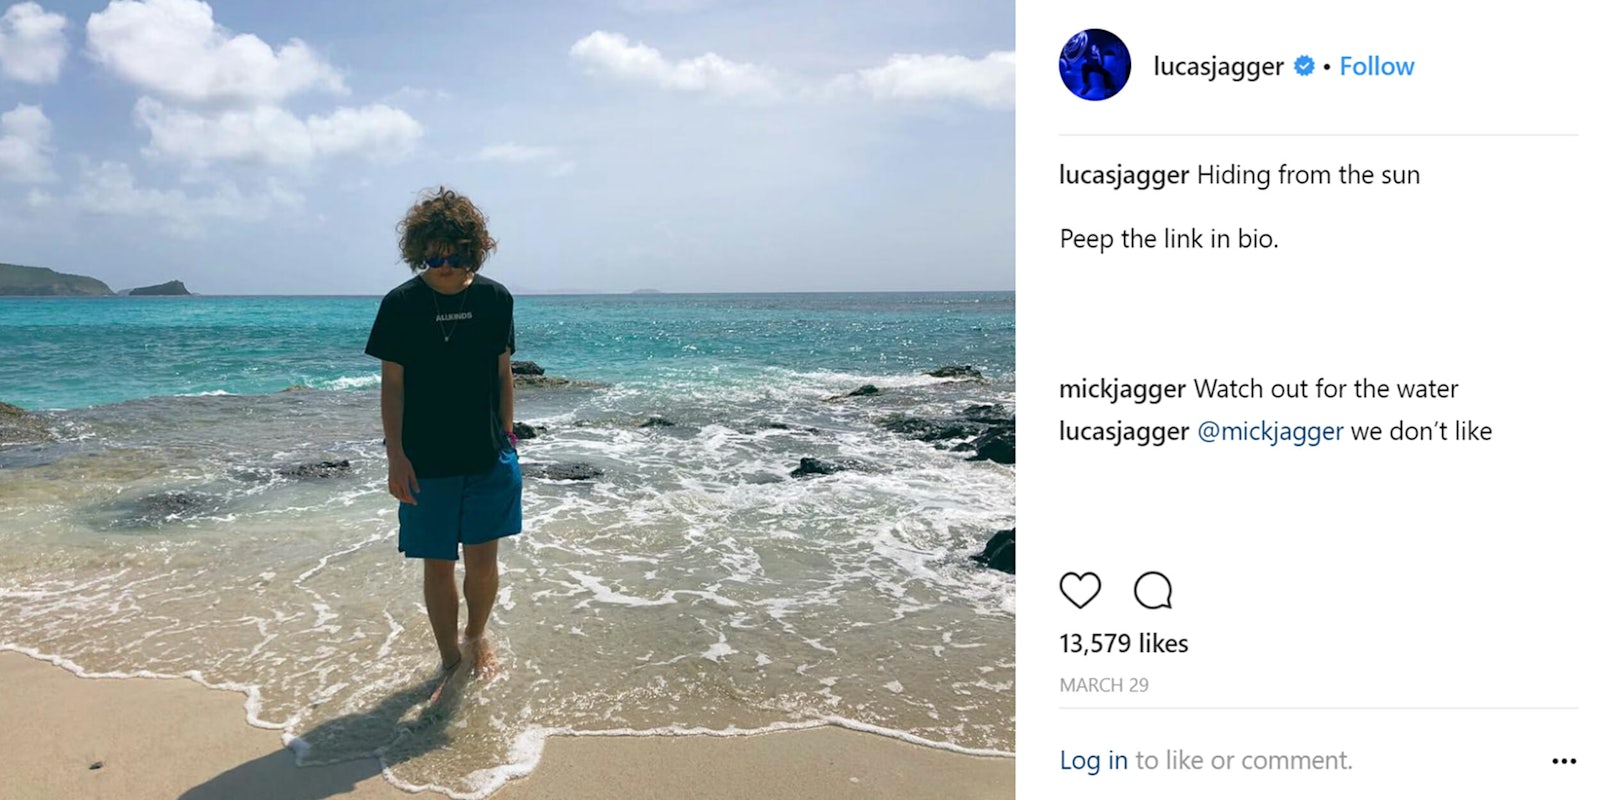 mick and lucas jagger instagram comment